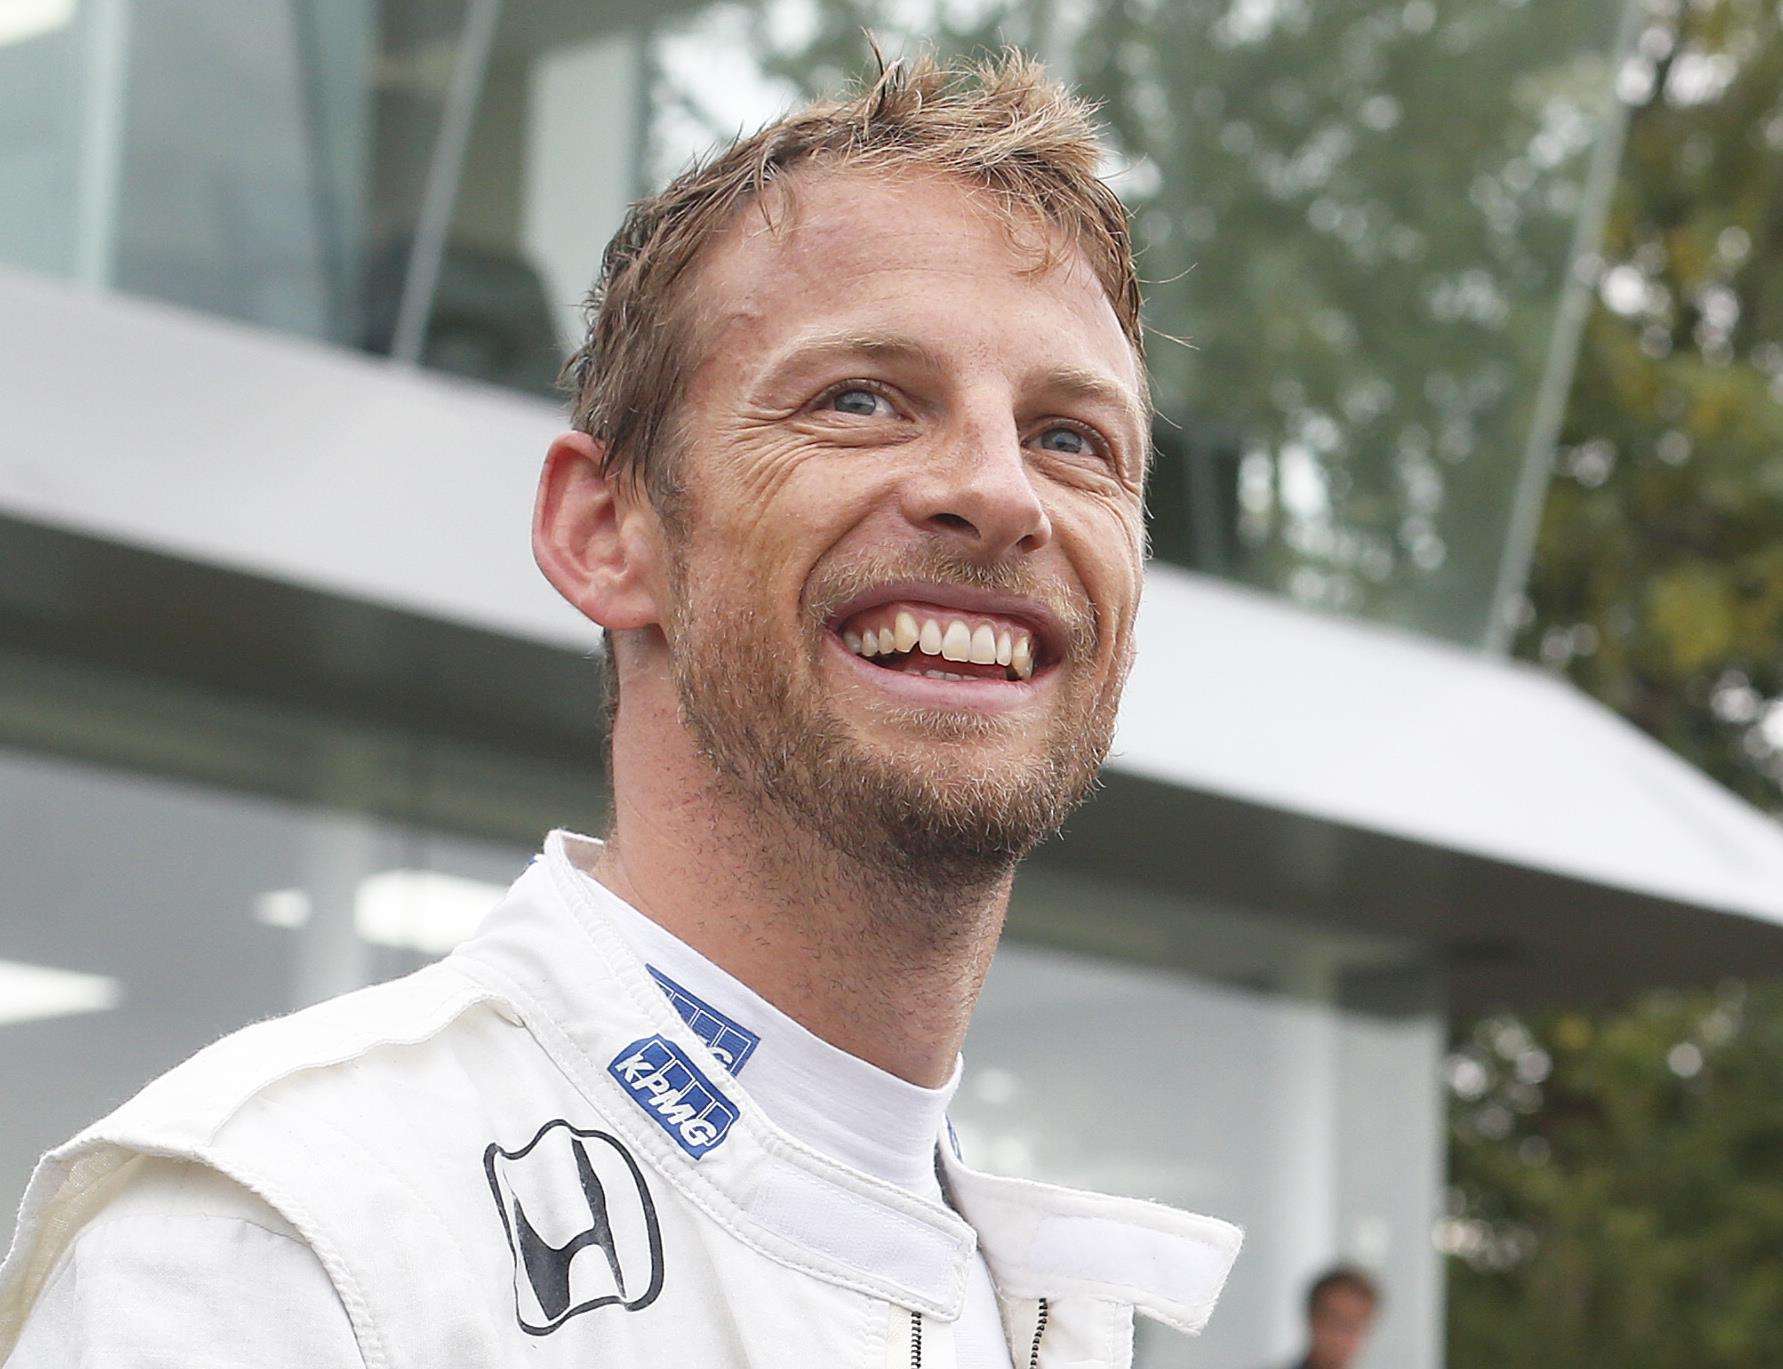 Jenson Button would pull in the crowds at Brands Hatch, says ex-F1 driver David Coulthard